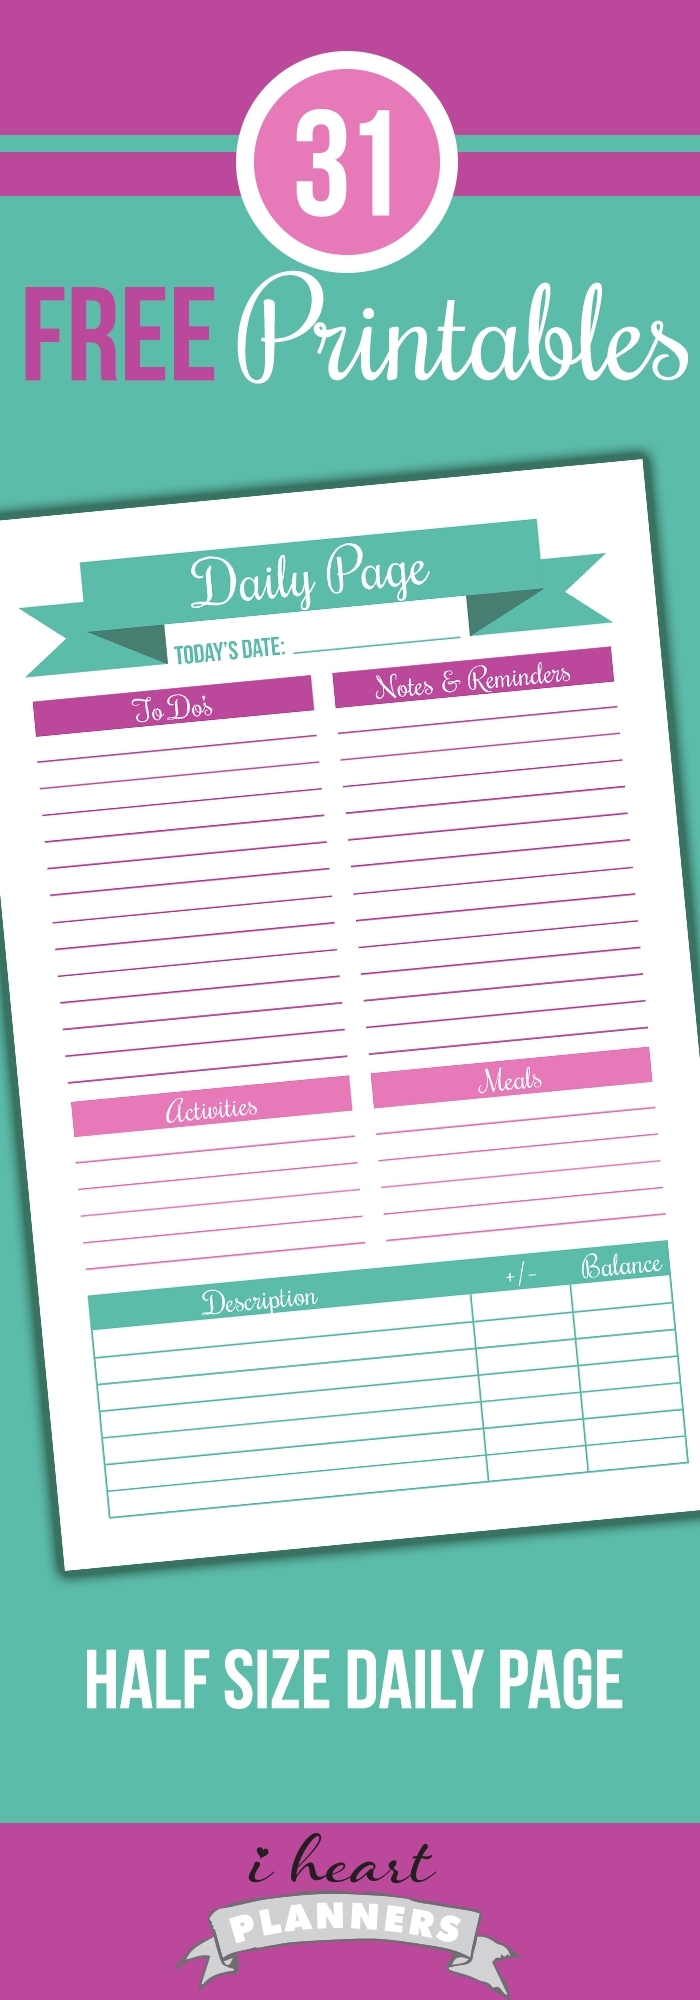 Daily Planner Printable In Half Size (Day 2) - I Heart Planners throughout Free Printable Daily Planner Page Half